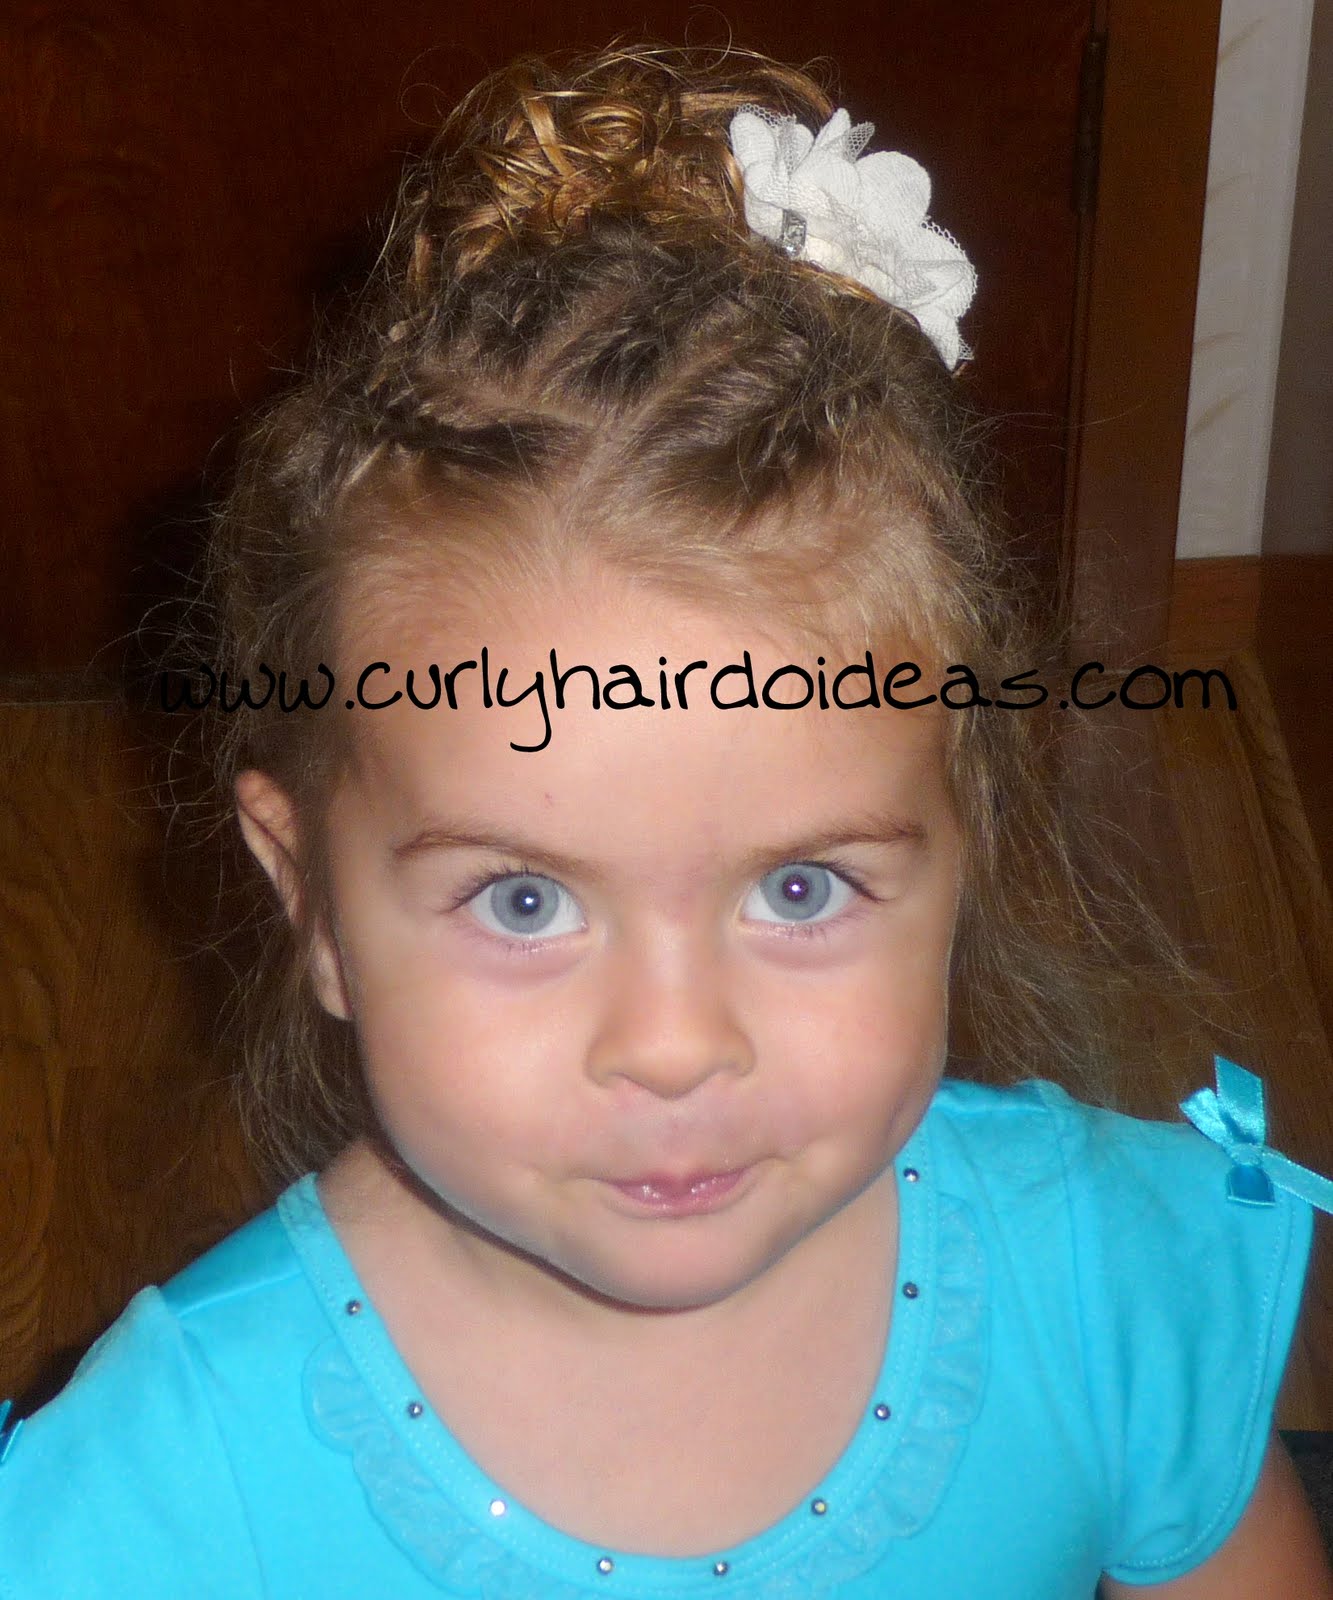 Toddler Hairstyle for Dance Class!